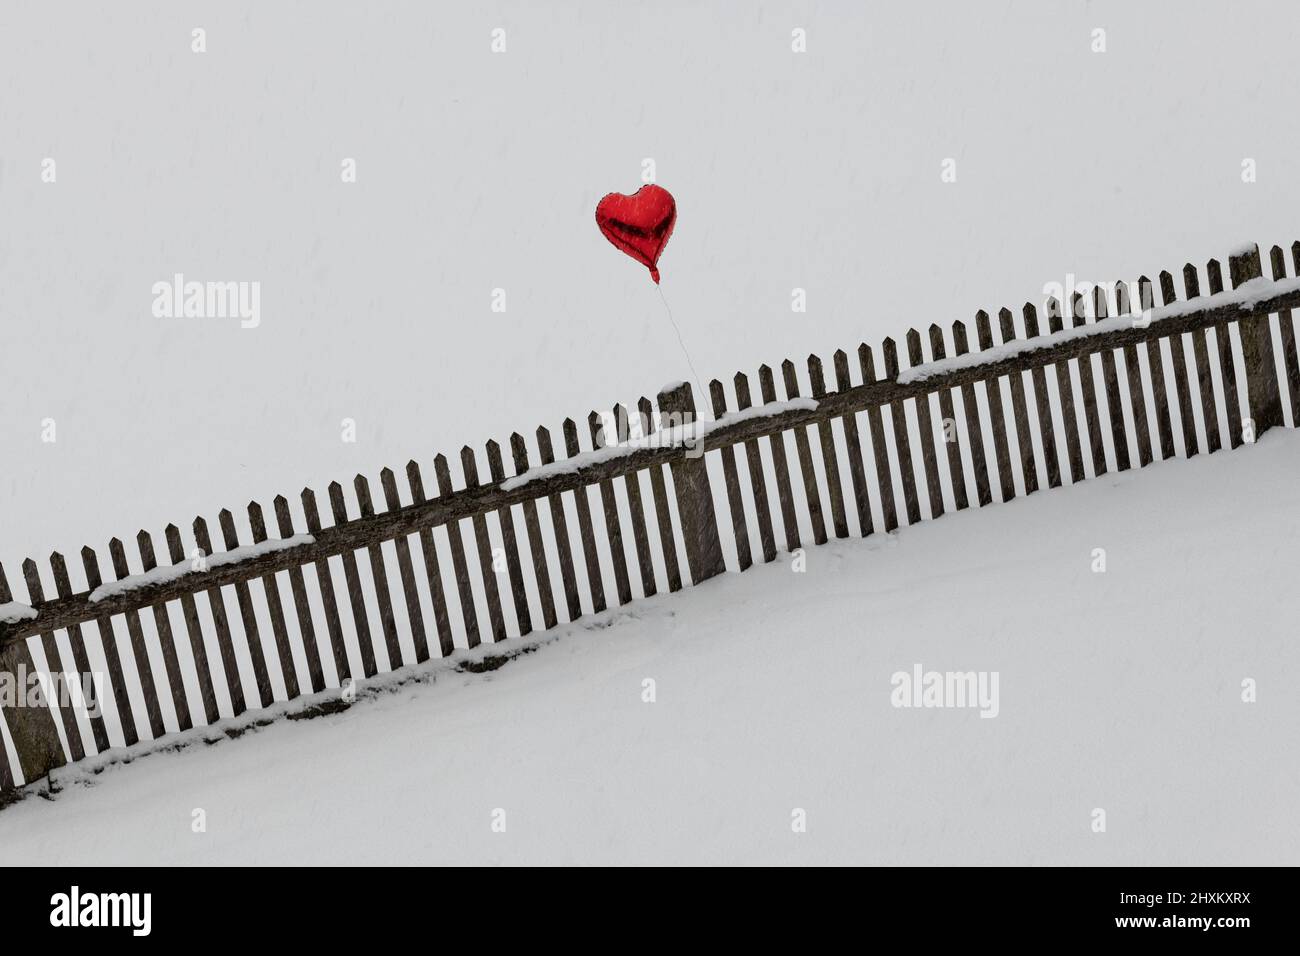 heart shaped red balloon hovering over wooden fence in snow covered llandscape Stock Photo